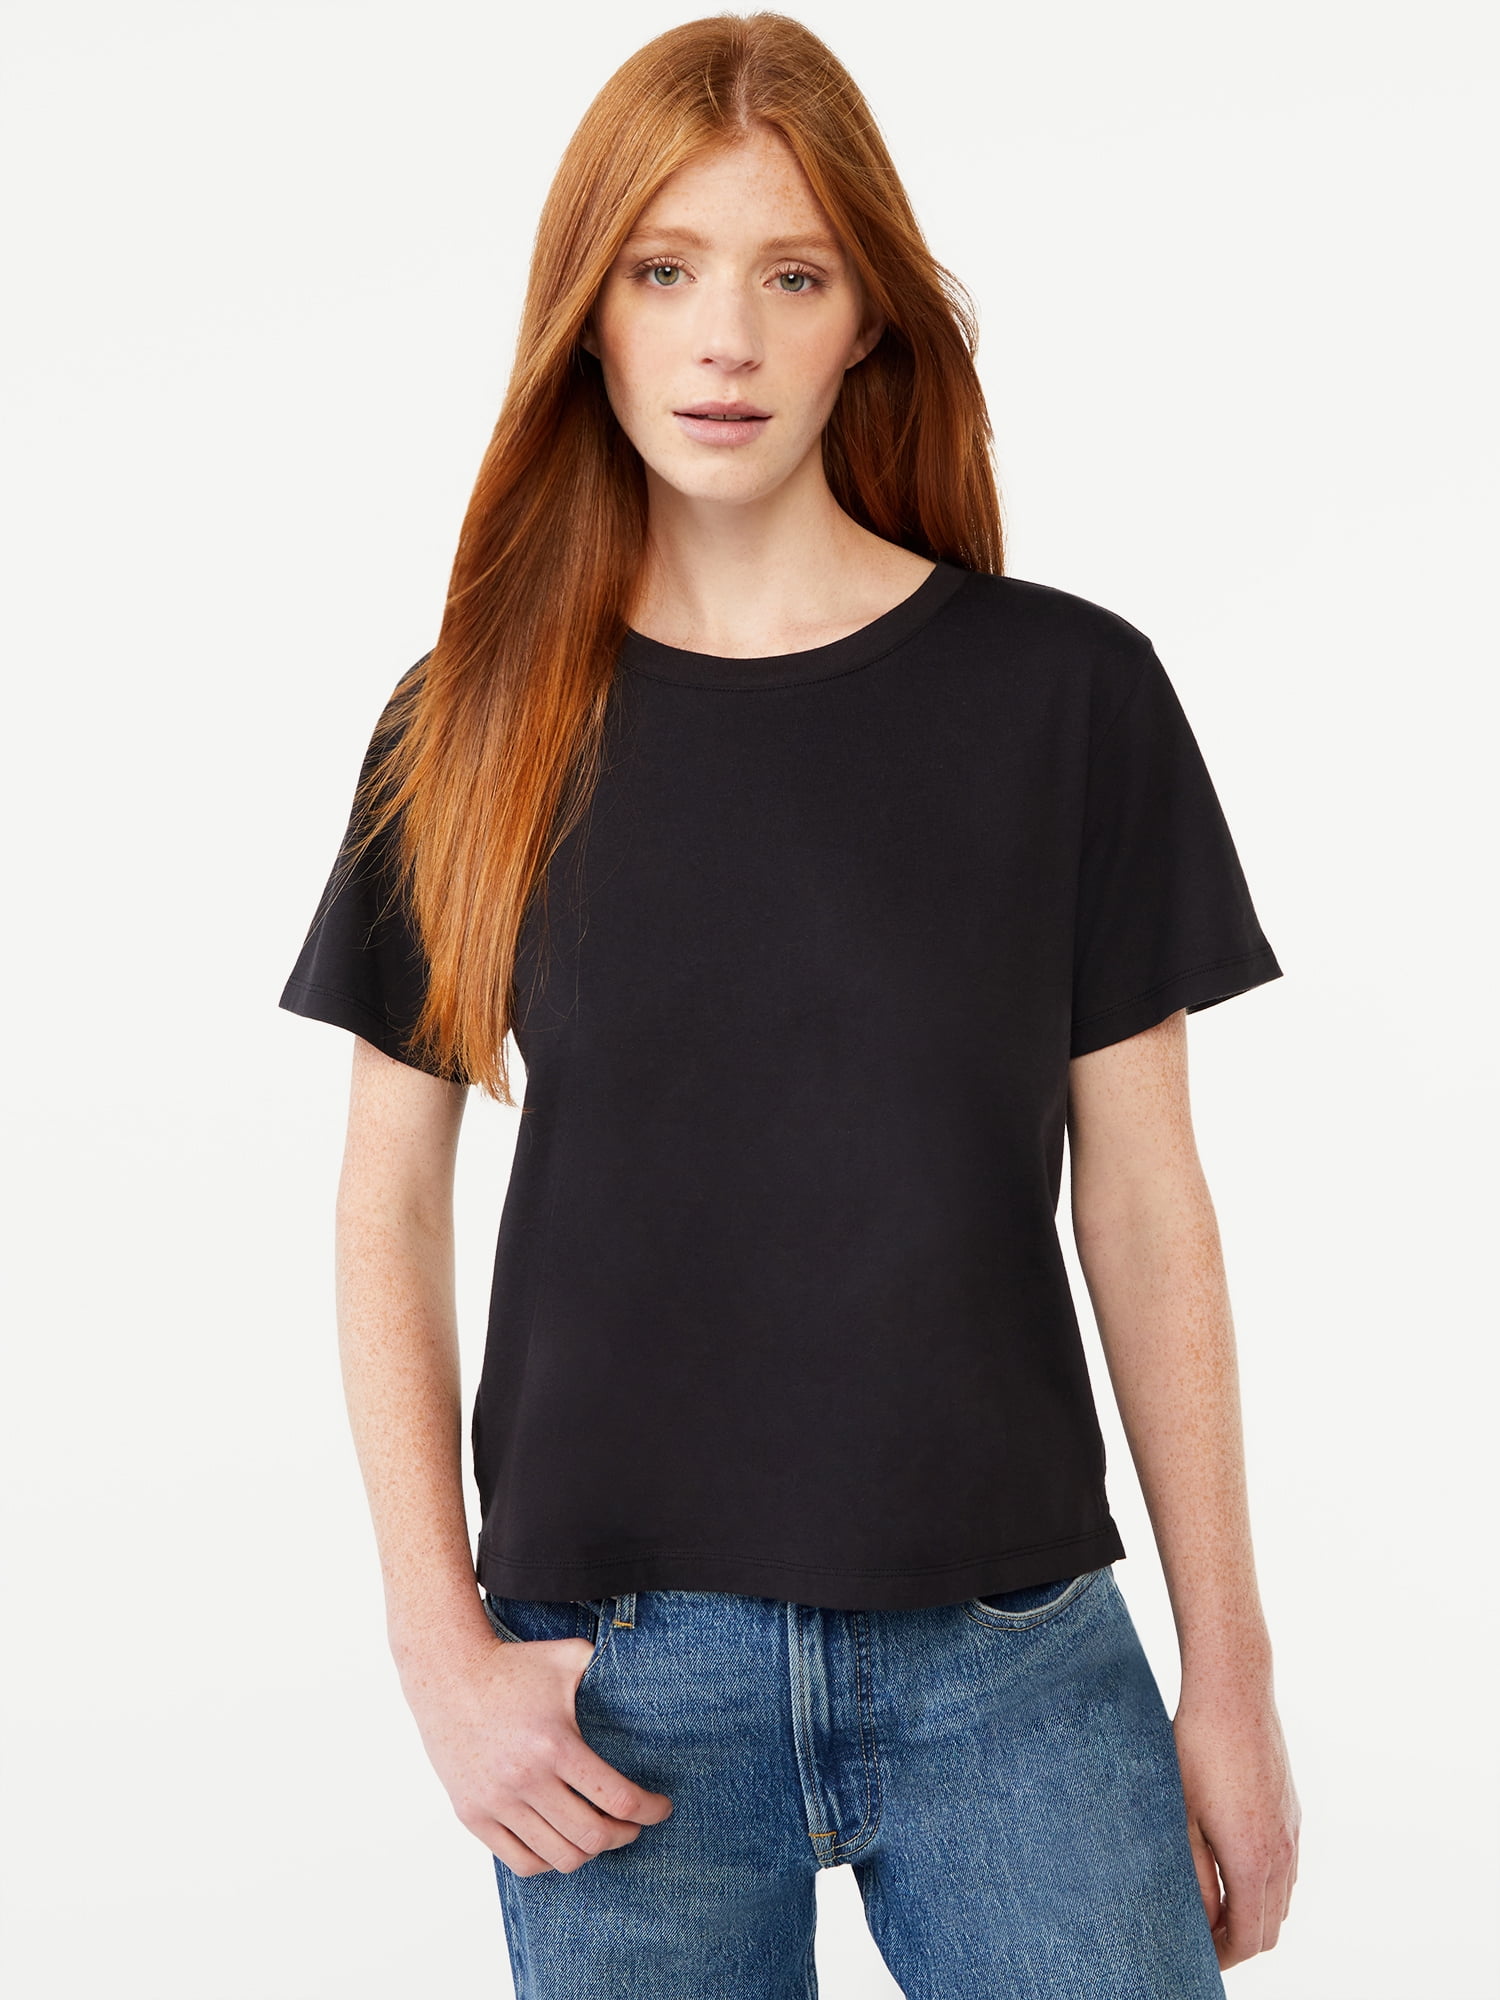 Free Assembly Women's Crop Box Tee with Short Sleeves